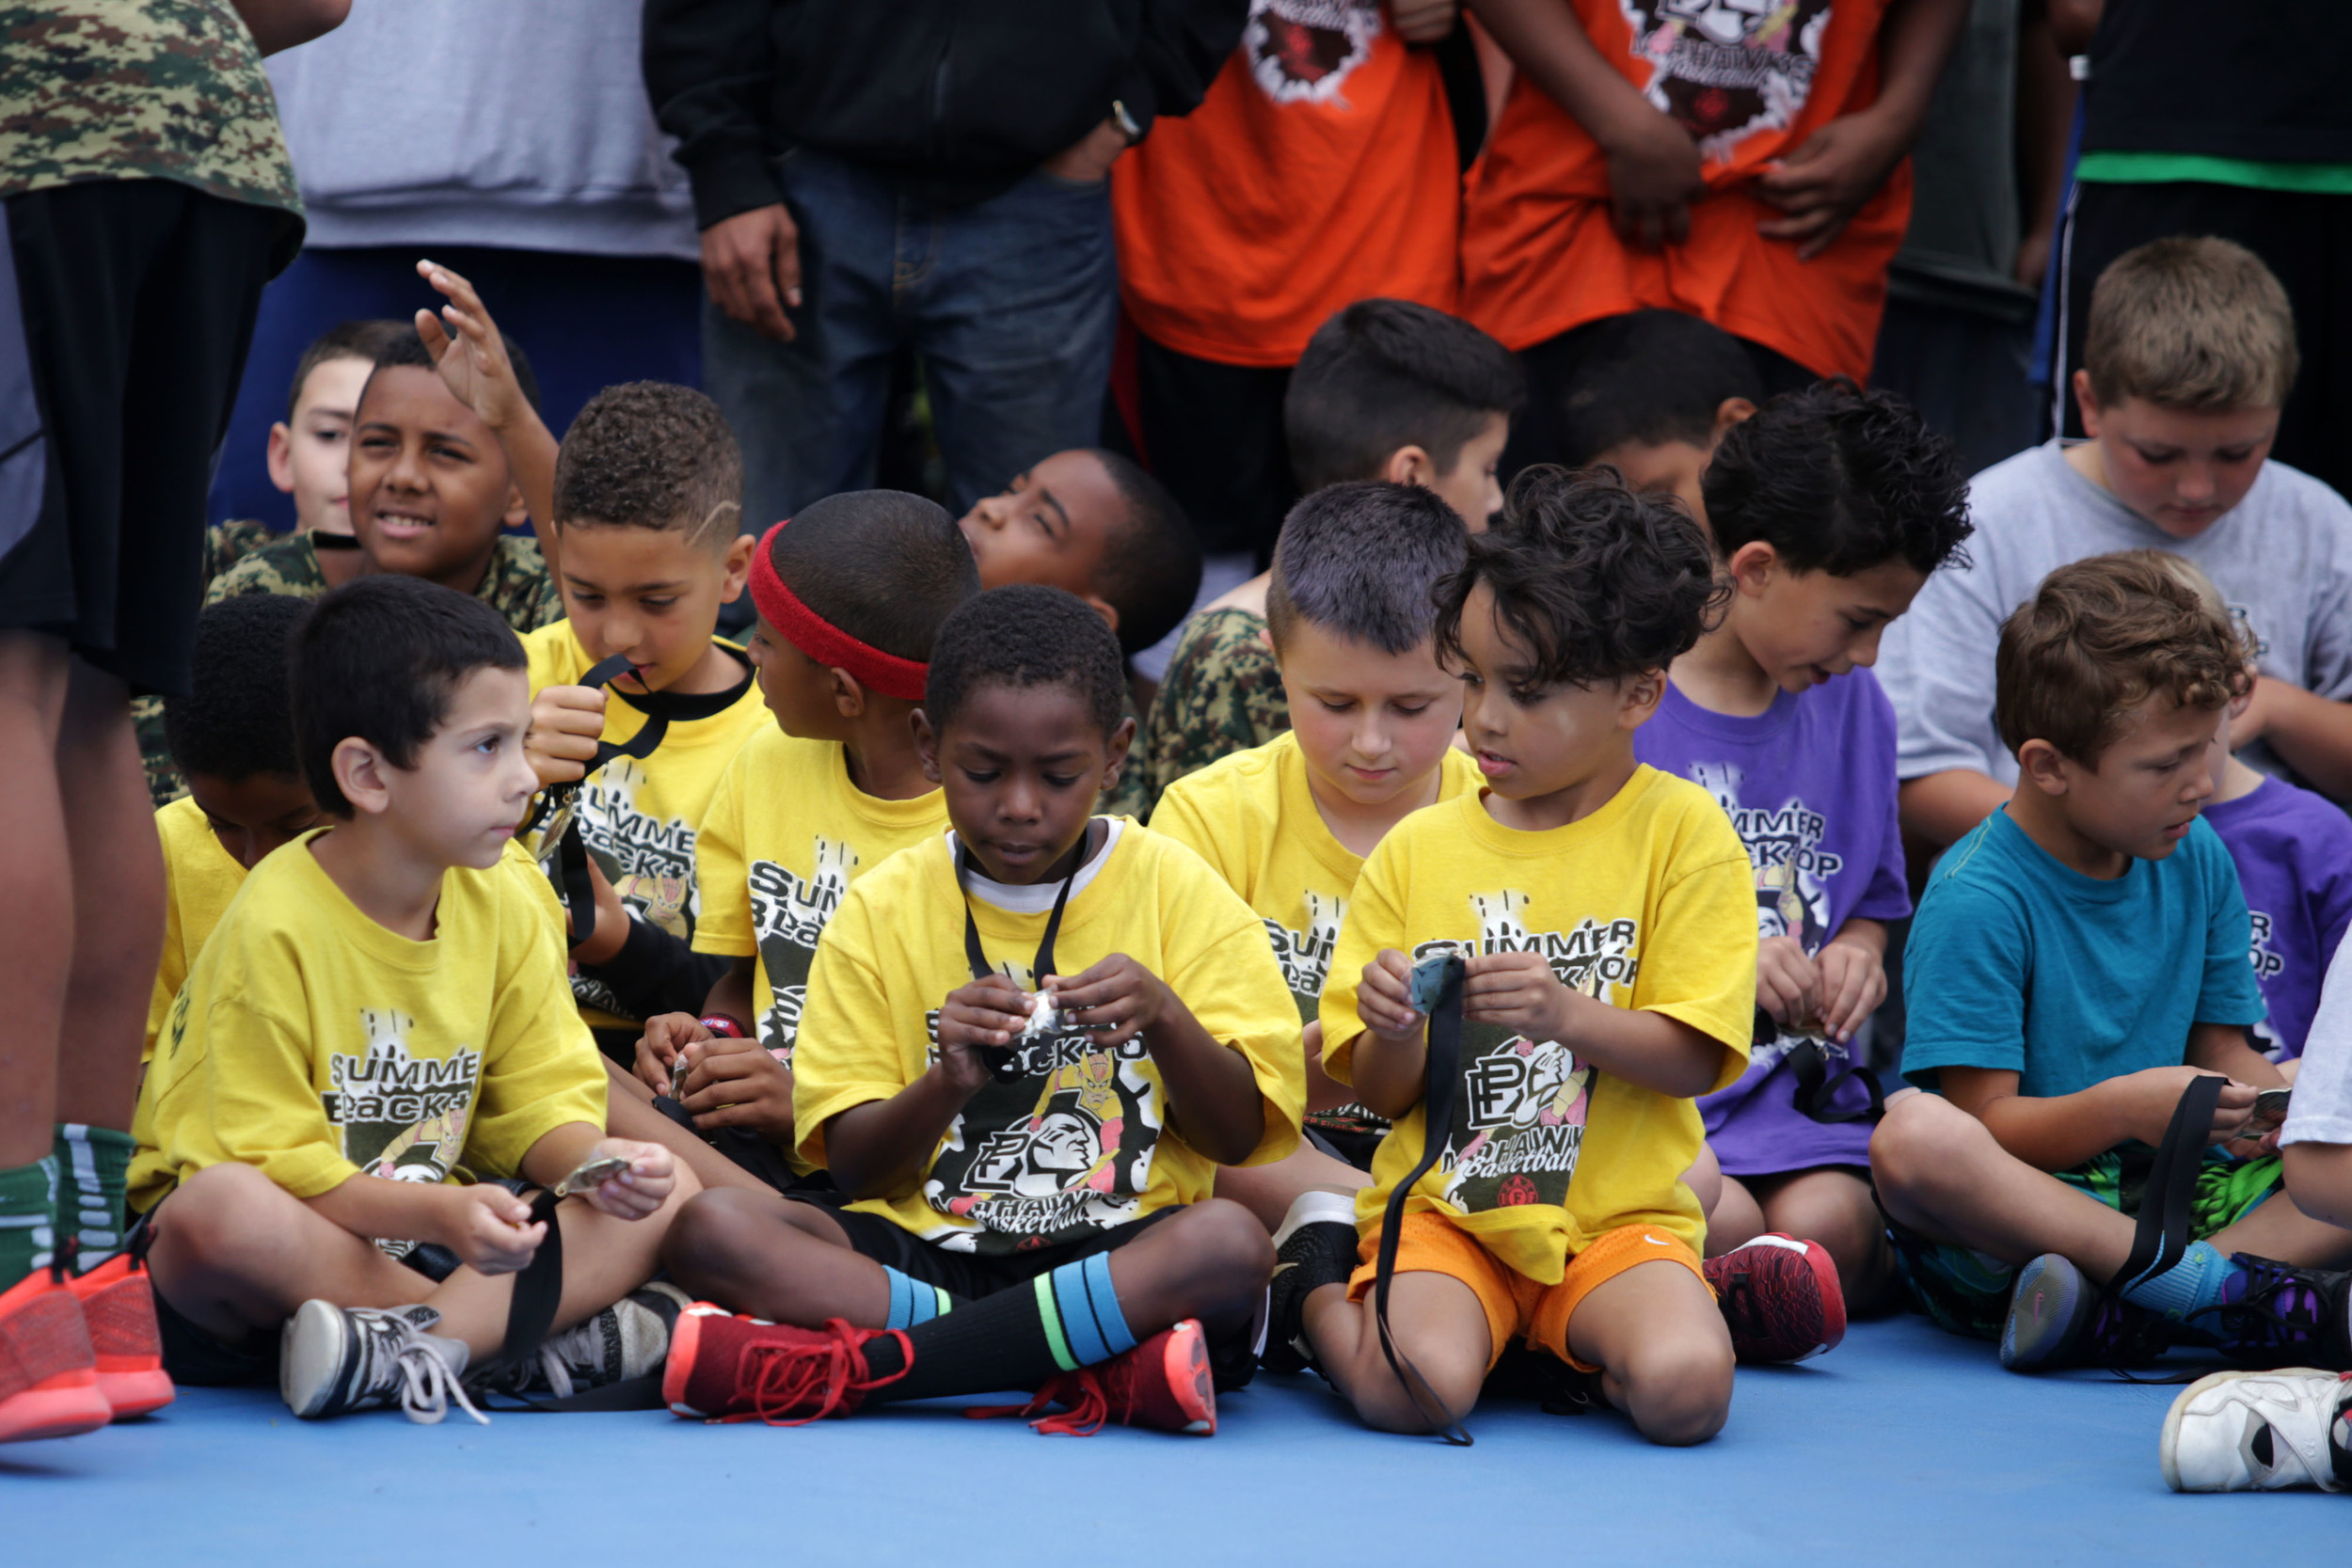 Mohawk Tiny Ballers from the K through 3rd grade division are awarded medals after competing.